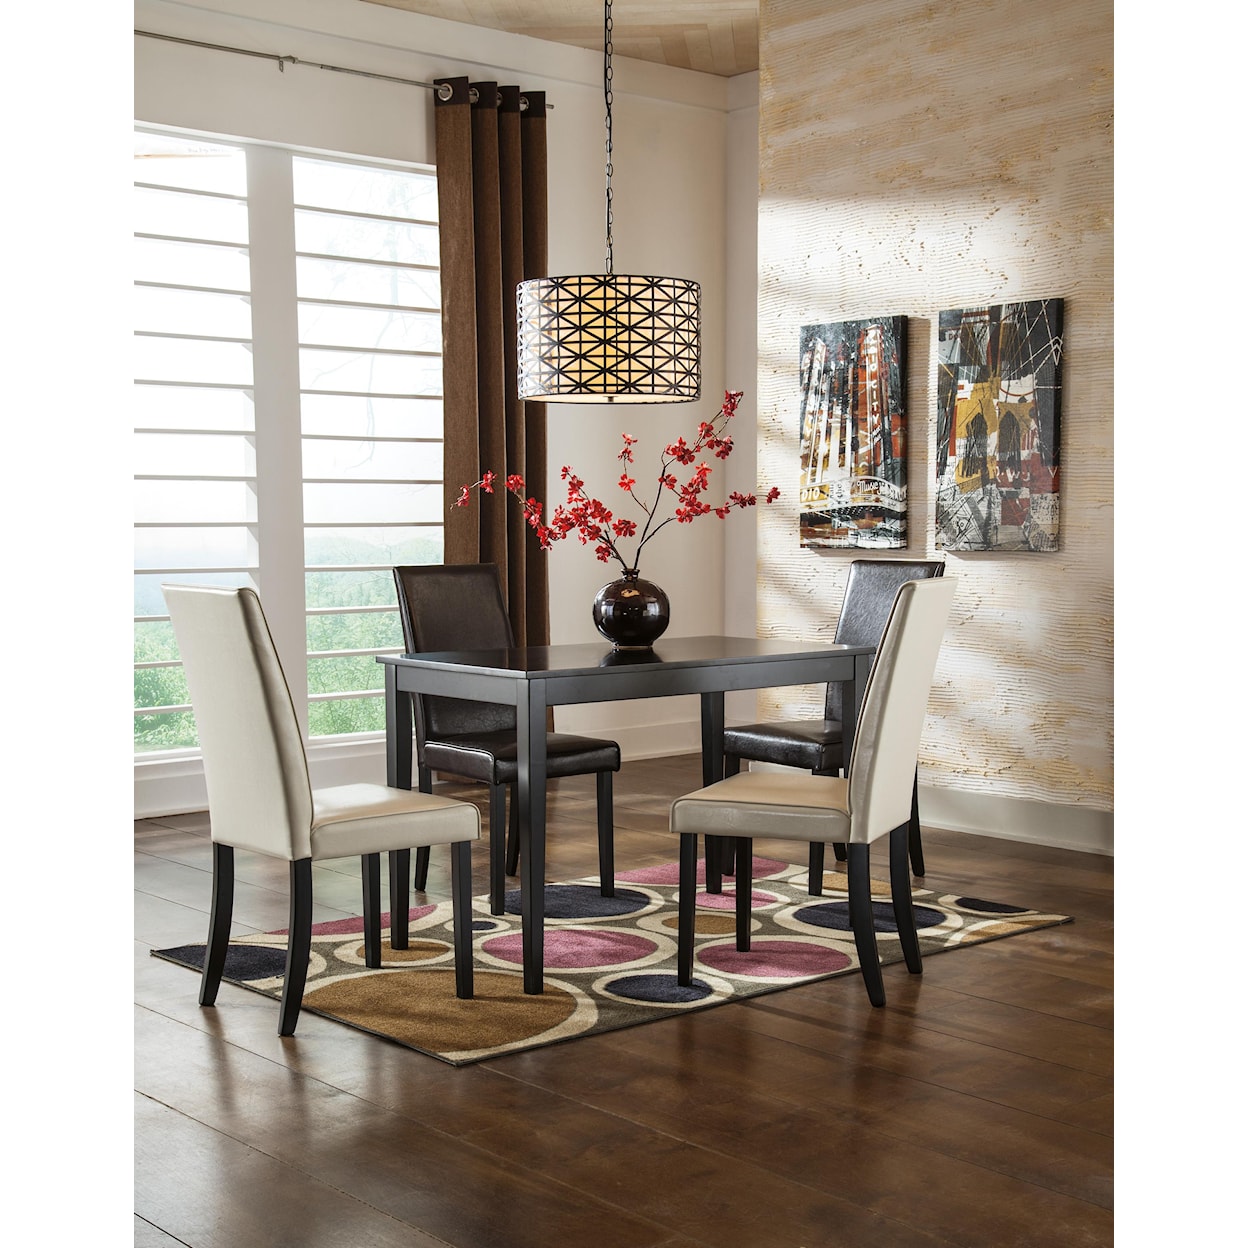 Signature Design by Ashley Kimonte 5pc Dining Room Group